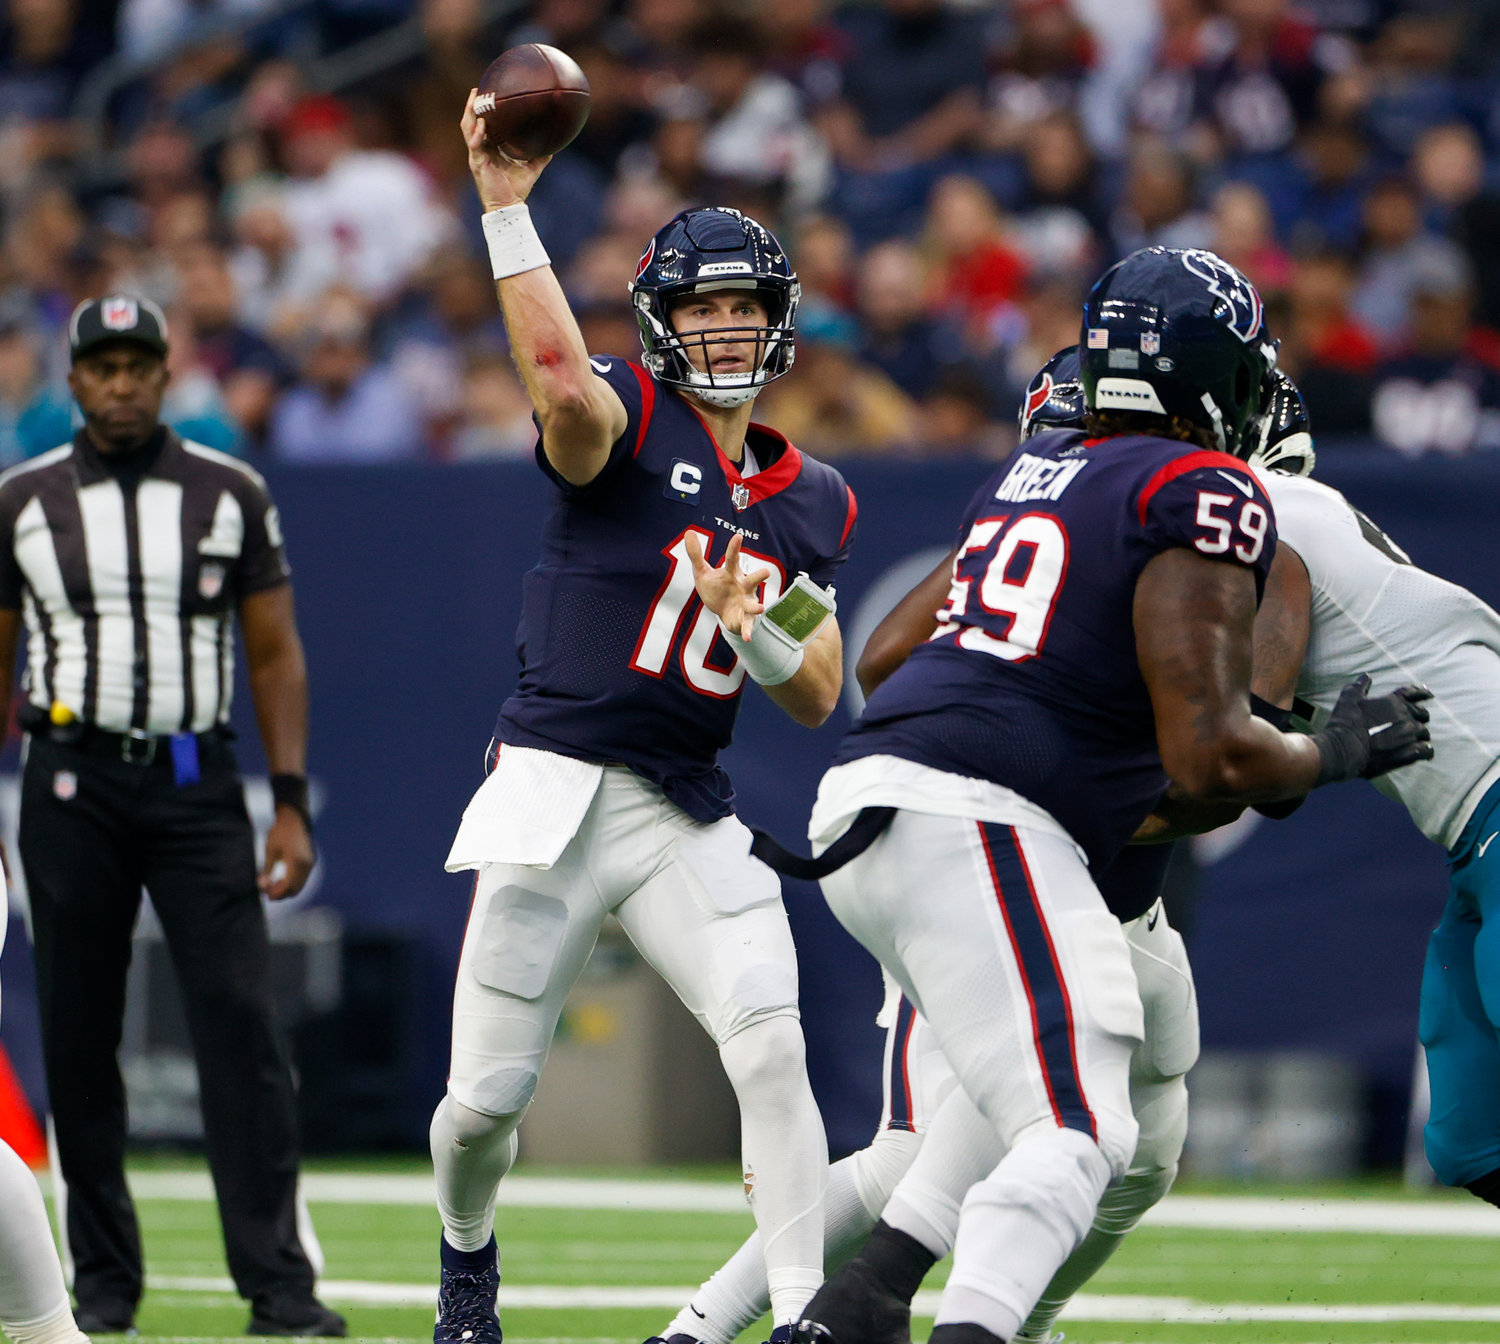 Texans quarterback Davis Mills (10) passes the ball during an NFL game between the Houston Texans and the Jacksonville Jaguars on Jan. 1, 2023 in Houston. The Jaguars won, 31-3.